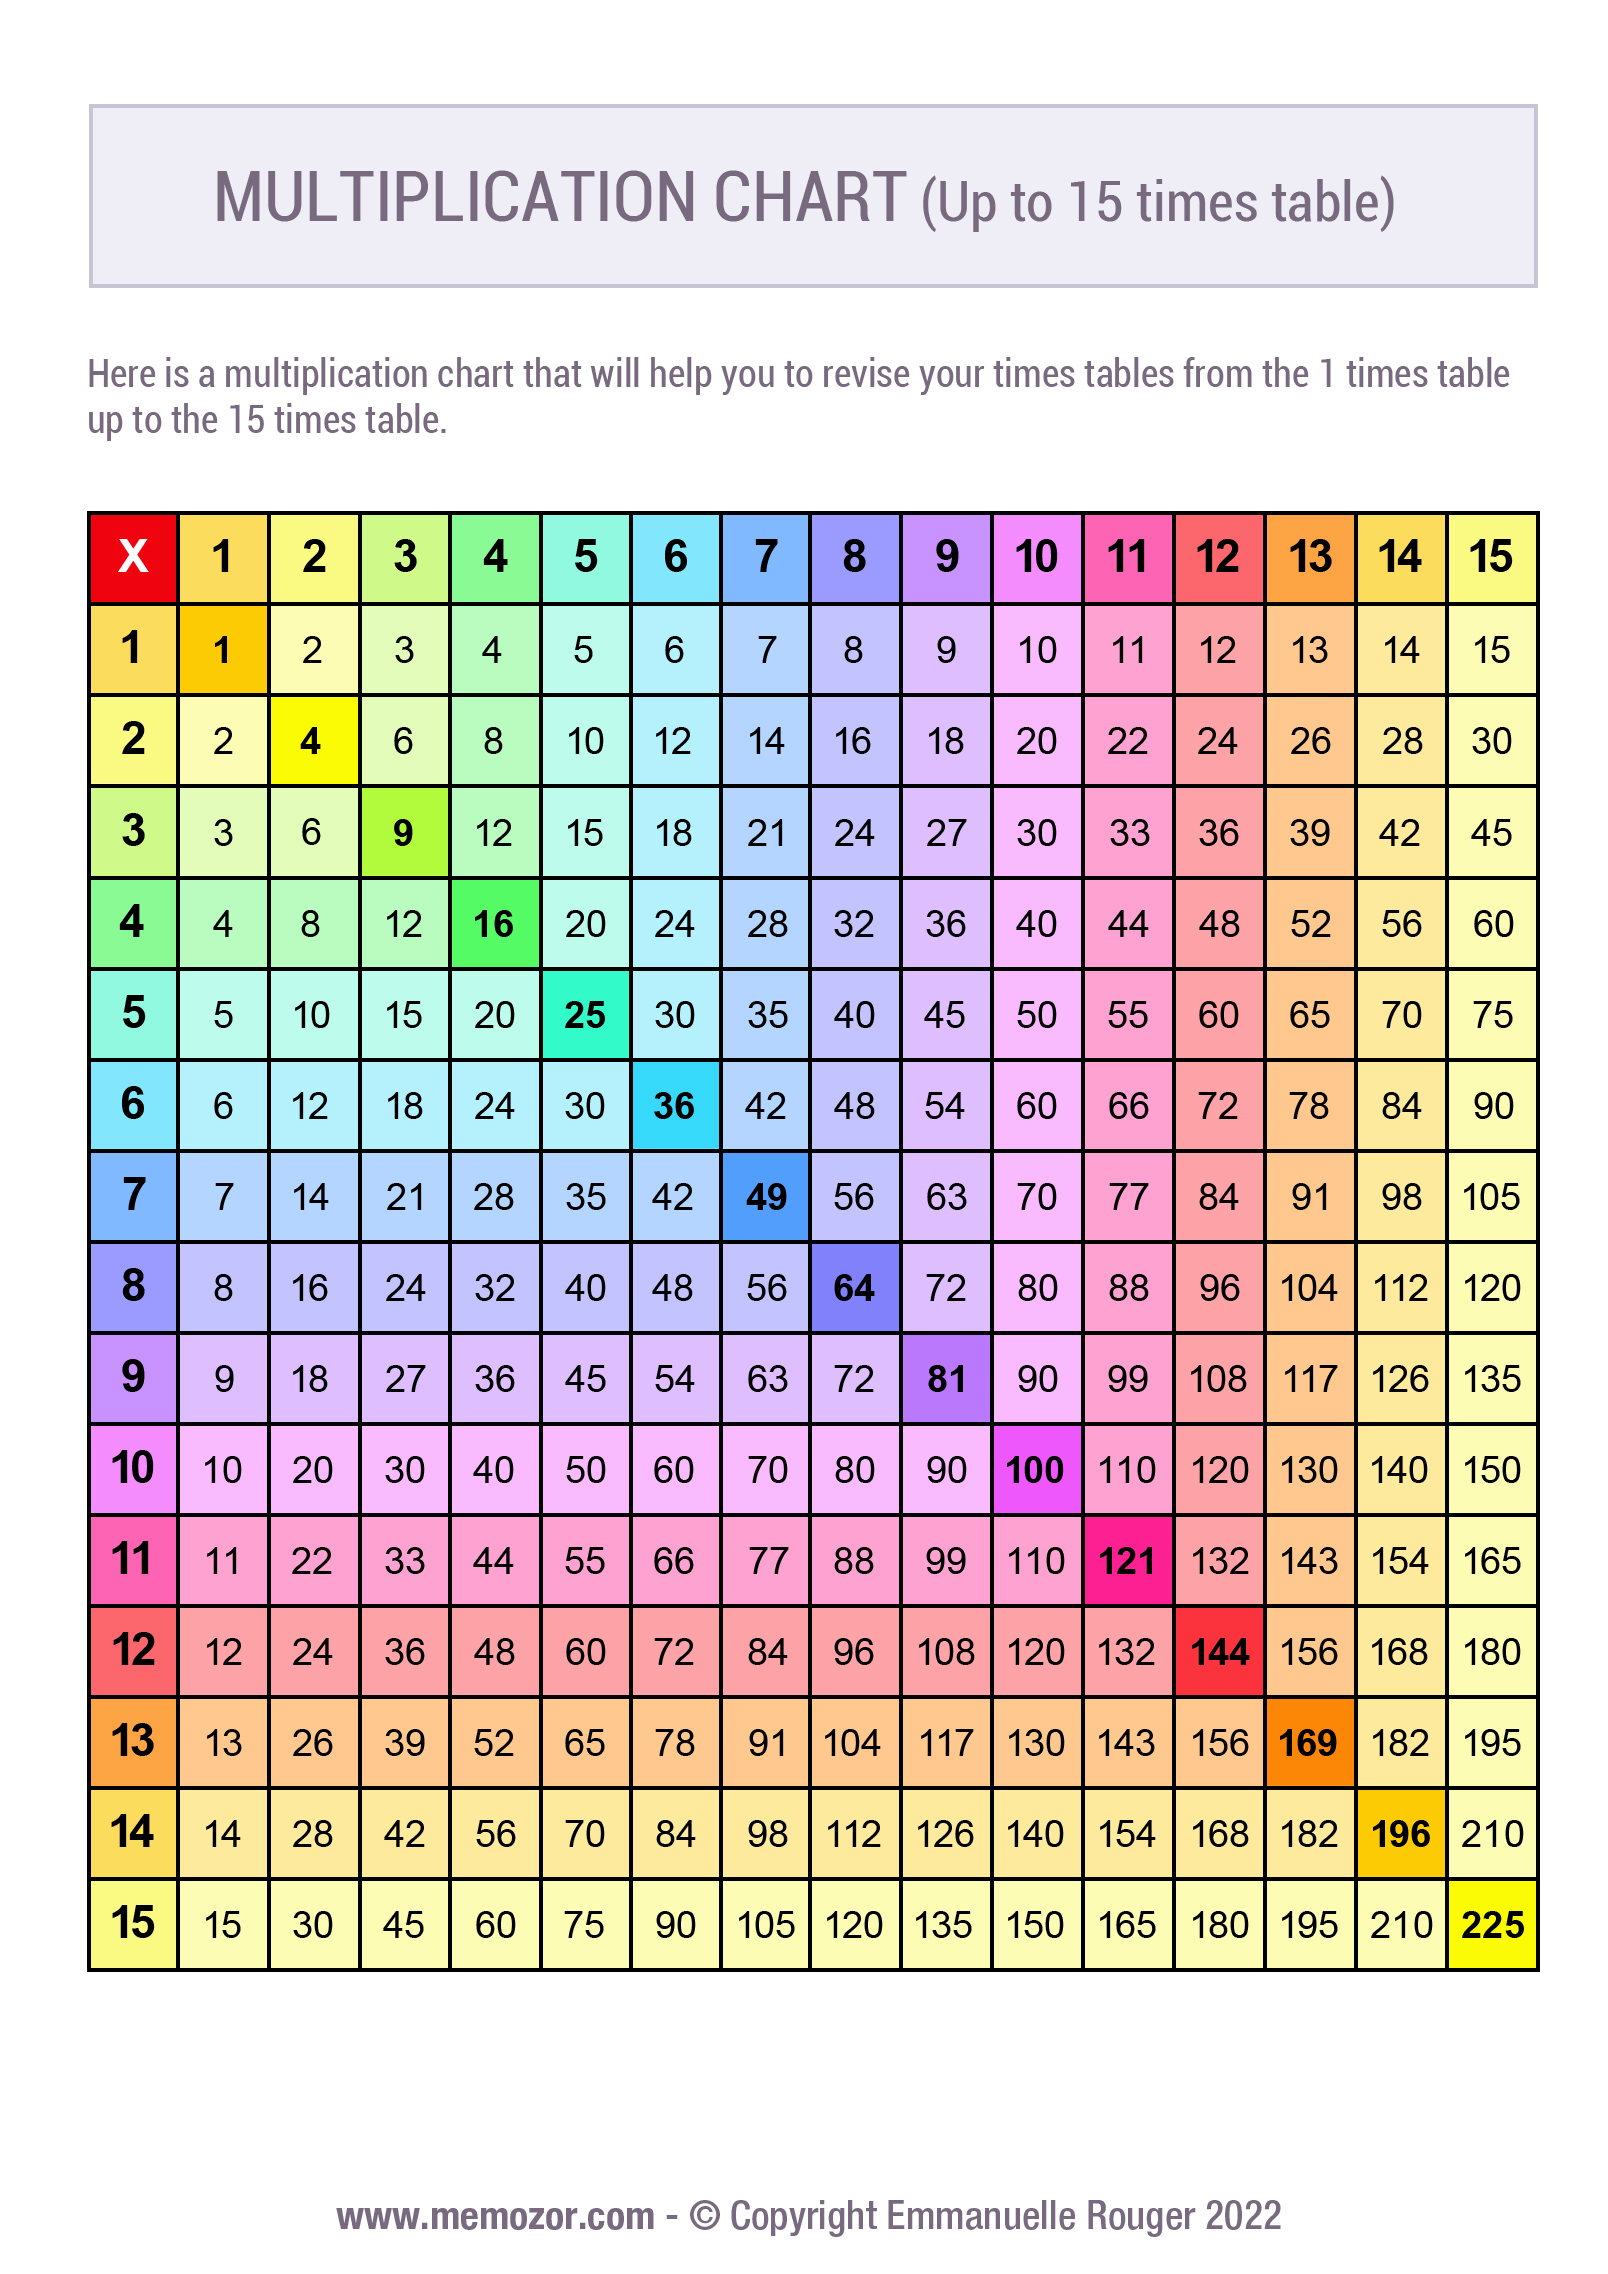 multiplication-table-15x15-multiplication-chart-multiplication-images